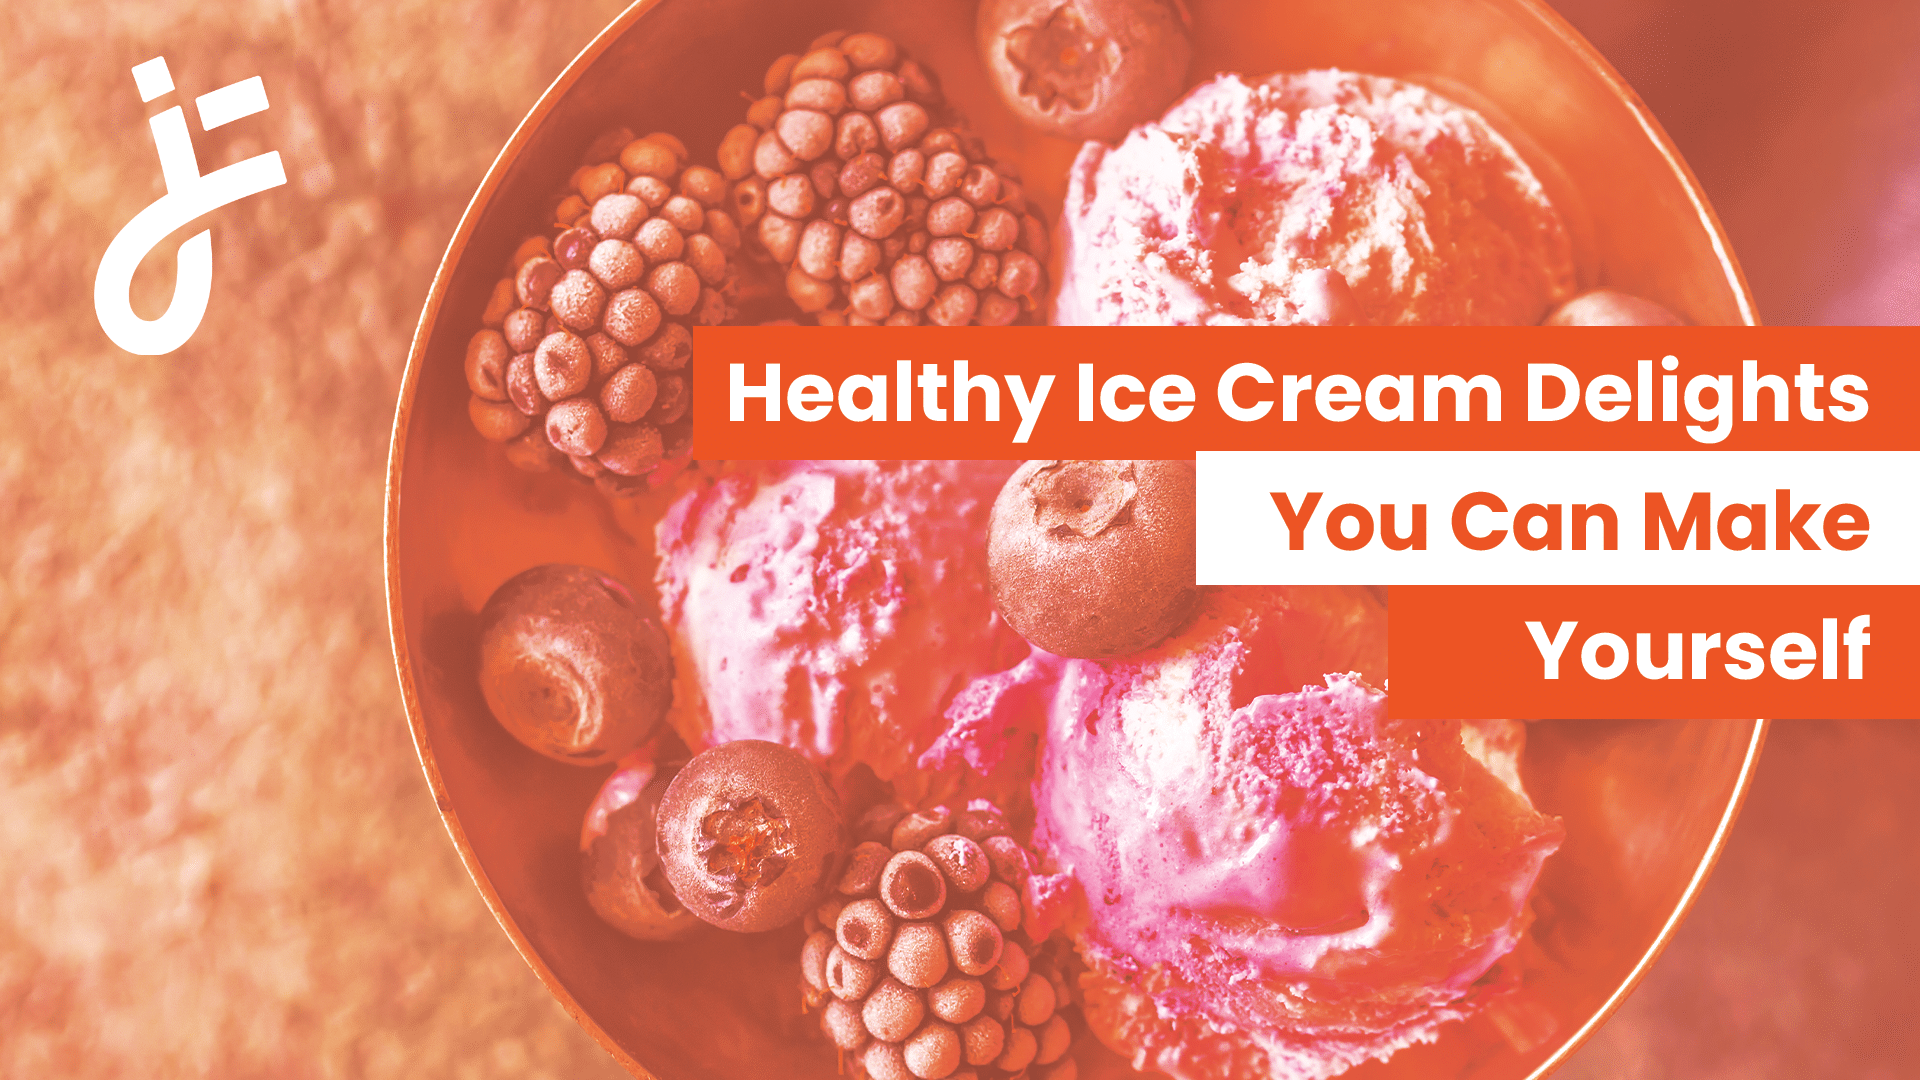 Healthy Ice Cream You Can Make Yourself